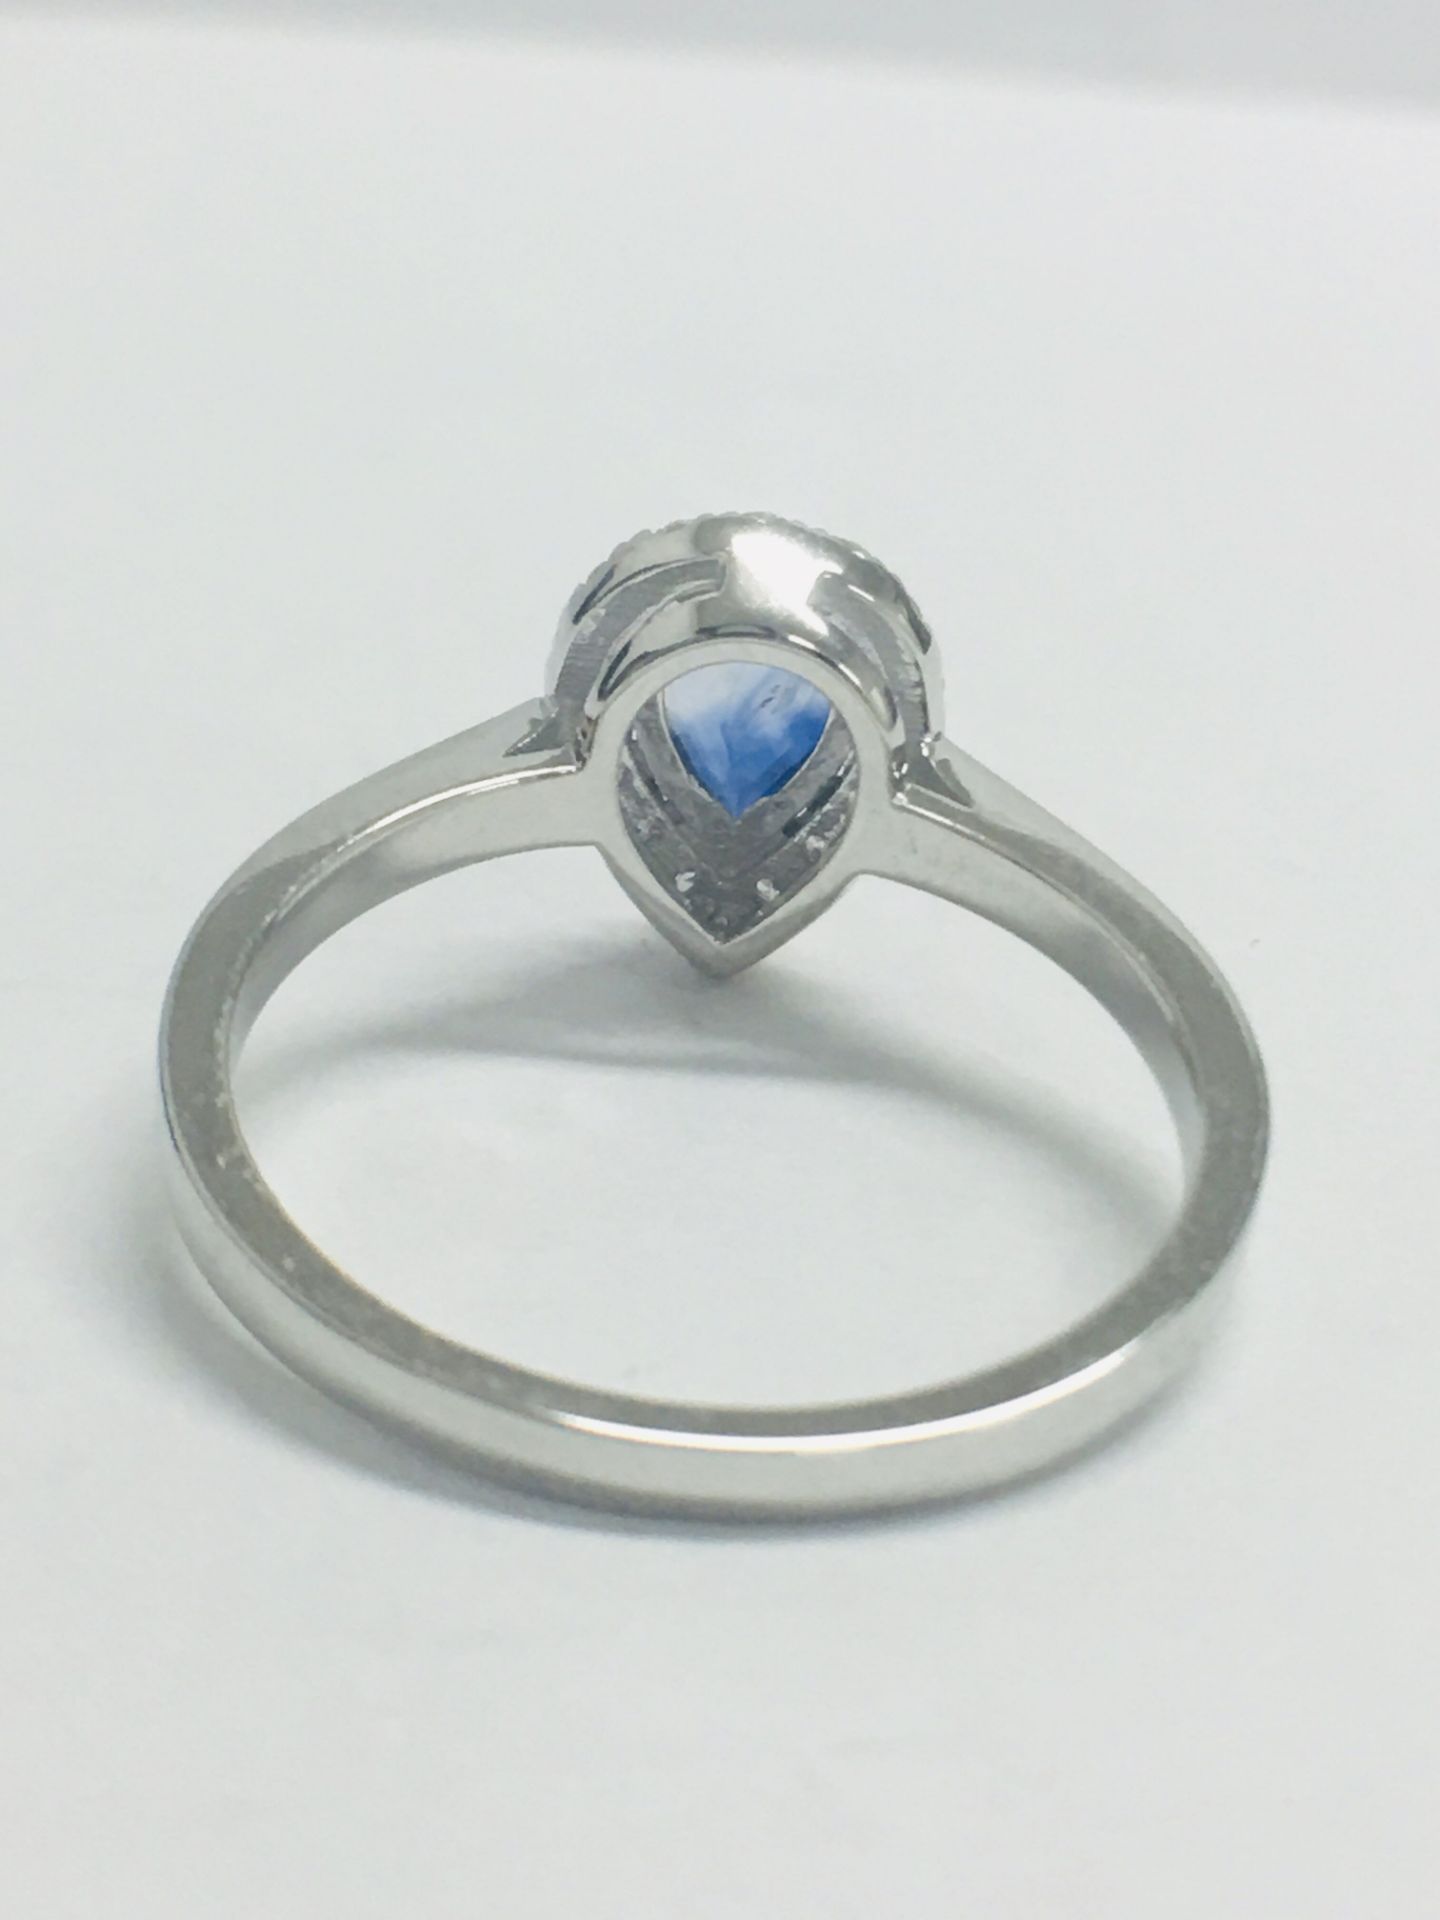 14Ct White Gold Sapphire And Diamond Ring - Image 5 of 10